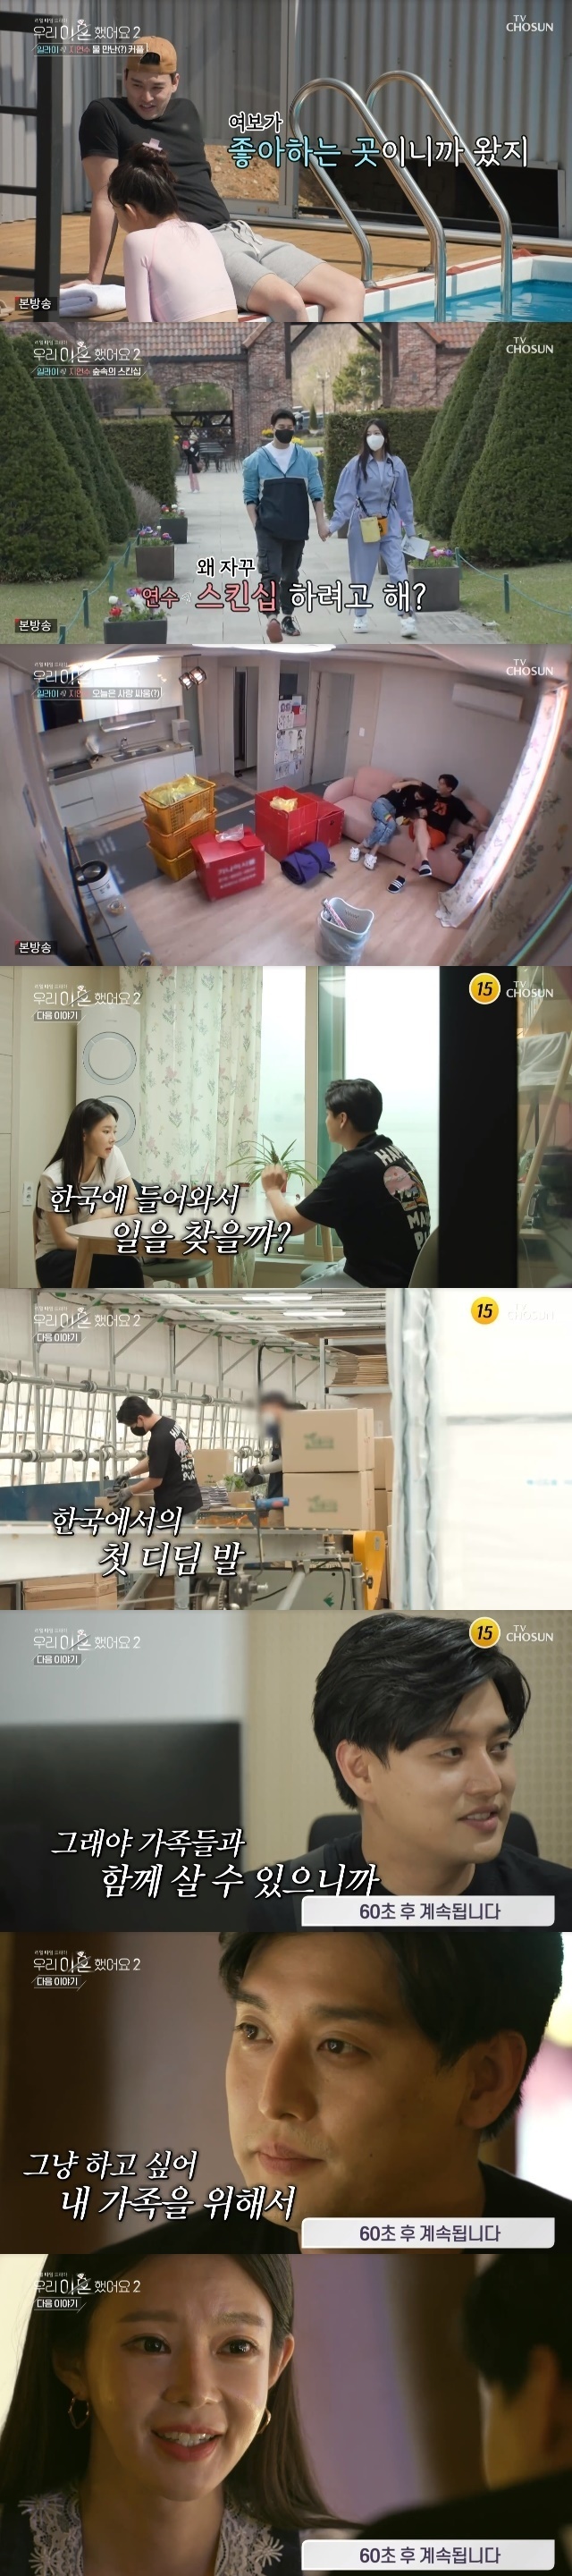 Eli Ji Yeon-soo, who decided to make a temporary merger, showed the storm skinship as well as future plans in Korea and turned on the green light of reunion.In the 6th episode of We Divorce 2 (hereinafter referred to as Udivorce 2), which was broadcast on May 13, Eli and Ji Yeon-soo showed the possibility of developing relations.On this day, Eli looked at Ji Yeon-soo, who appeared in a swimsuit, with a dripping eye, and praised him for being cute, sexy and ballerina-like.Eli then took his hand naturally when he went out on a date with Ji Yeon-soo, and Ji Yeon-soo asked, Why do you keep trying to touch?Ji Yeon-soo did not bother to refuse when Eli replied slyly, Im here to think about me because Im here.Elis skinning continued; Ji Yeon-soo offered Eli a temporary sum during his stay in Korea.Eli said that he plans to live in Korea earlier, so I want to see your real life pattern before I decide it.If I move, there are three rooms there and one is different from the other floor (on the second floor), so I will give you a room, so will you pay the rent?Later, as he moved together, Eli looked directly at the words that Ji Yeon-soo had hurt his hand, and when he seemed to put things up in the high place, he showed up close and replaced them.Kim Won-hee watched these two people with a smile saying, There is a little water level.Later, during a brief break, Eli turned the mood into a stroking and shoulder-shaking pull of Ji Yeon-soos head as he felt a fight-like atmosphere with Ji Yeon-soo.Eli once again said, Come here to Ji Yeon-soos irritation, and pulled Ji Yeon-soo and said, This is how we live.I have to think about living well in the future while tit-for-tat. Ji Yeon-soo said: Theres no you in my future - Im taking my husbands seat.Just as a dad, Eli ticked, but touching Ji Yeon-soos thigh side, Is that why youre wearing these pants today? To do hearts?There was a bear in the back of the pants, but it was a peeker. In the end, the two people who were relieved of the atmosphere somehow made a promise to Do not fight in front of Minsu, and Shin Dong-yeop laughed at the mischievous wind that Minsu would be dark.Meanwhile, the trailer depicted a more hopeful couple: Elis decision to find a job in Korea, Ji Yeon-soo laughed and said, Get a job?, and Eli wrote his resume, saying, Ive decided so. After that, Eli started a new job where Factory was supposed to be.